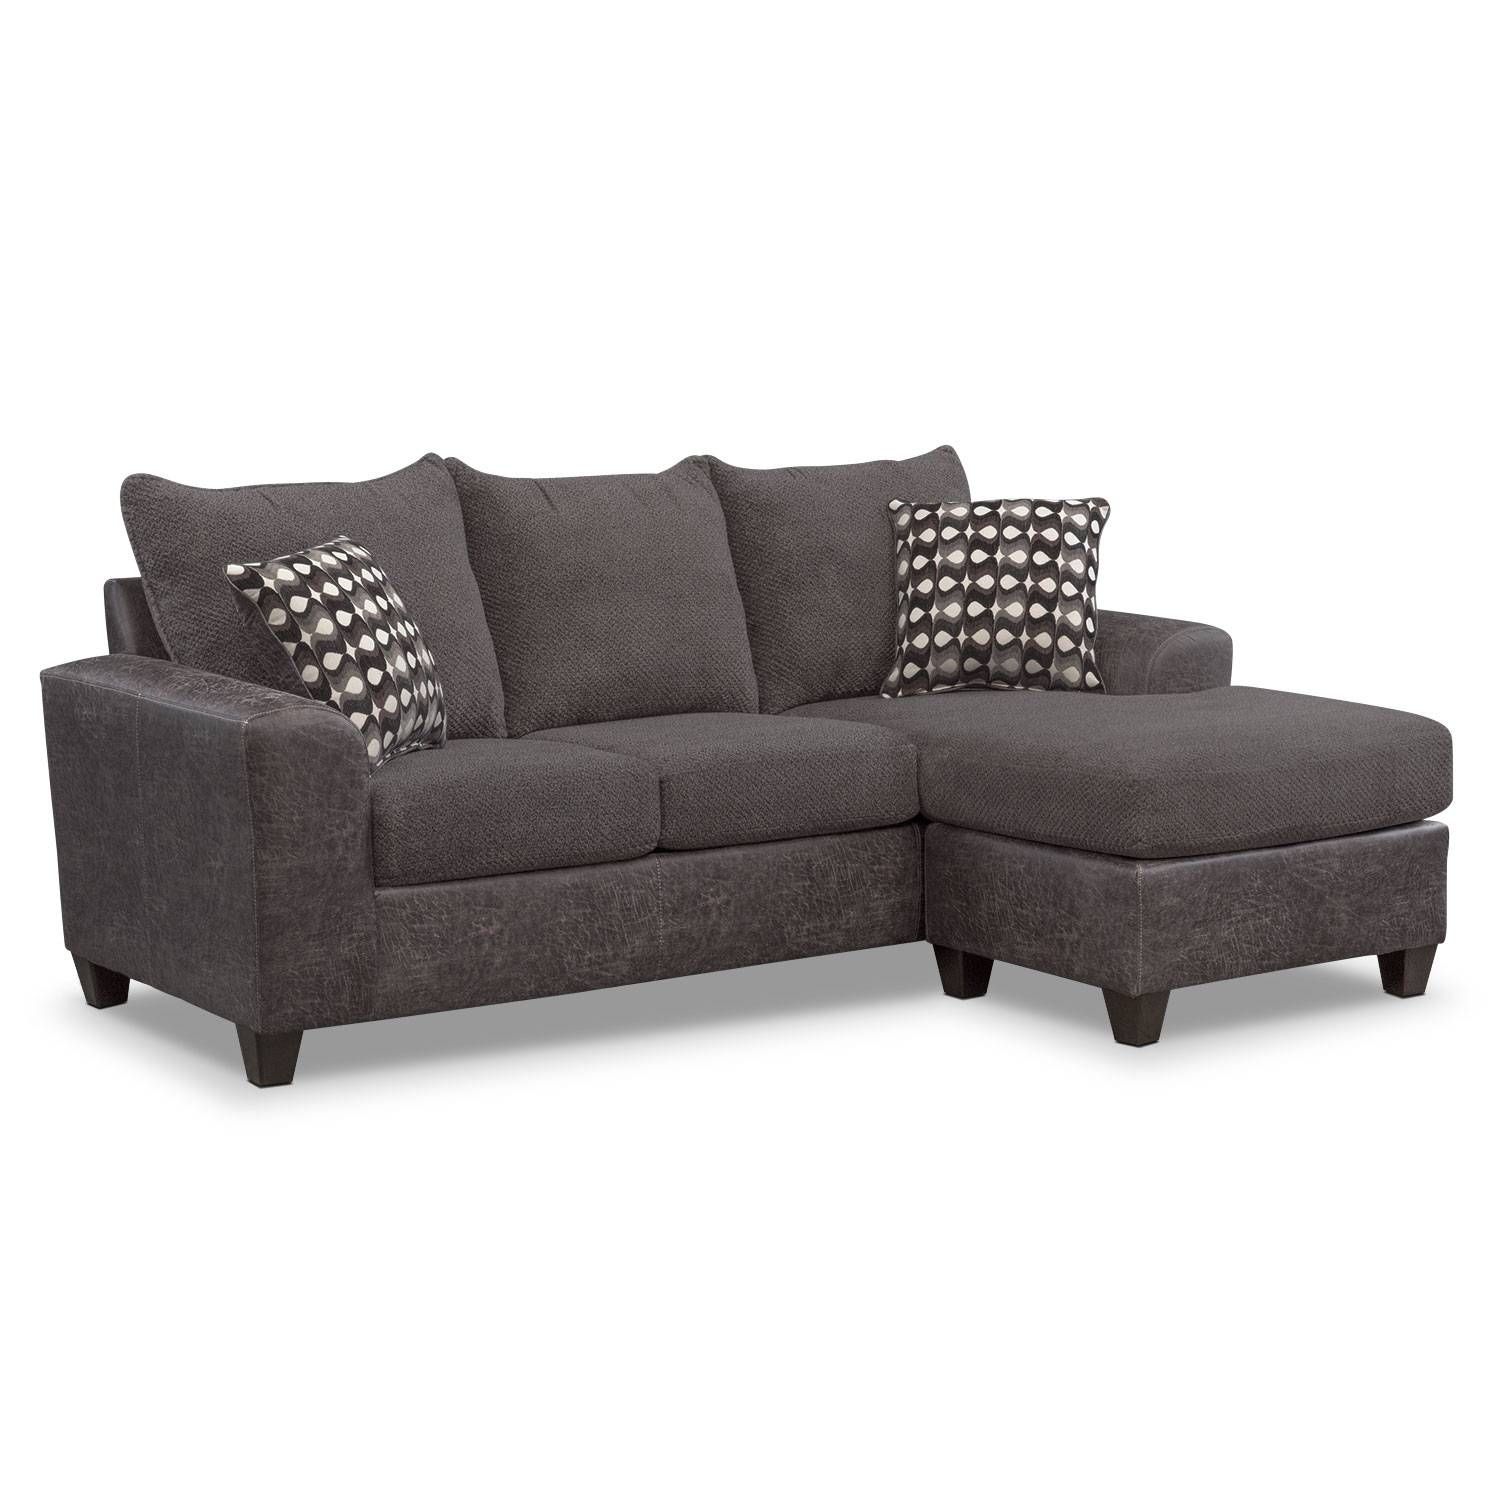 Sofas & Couches | Living Room Seating | Value City Furniture Intended For Value City Sofas (Photo 1 of 25)